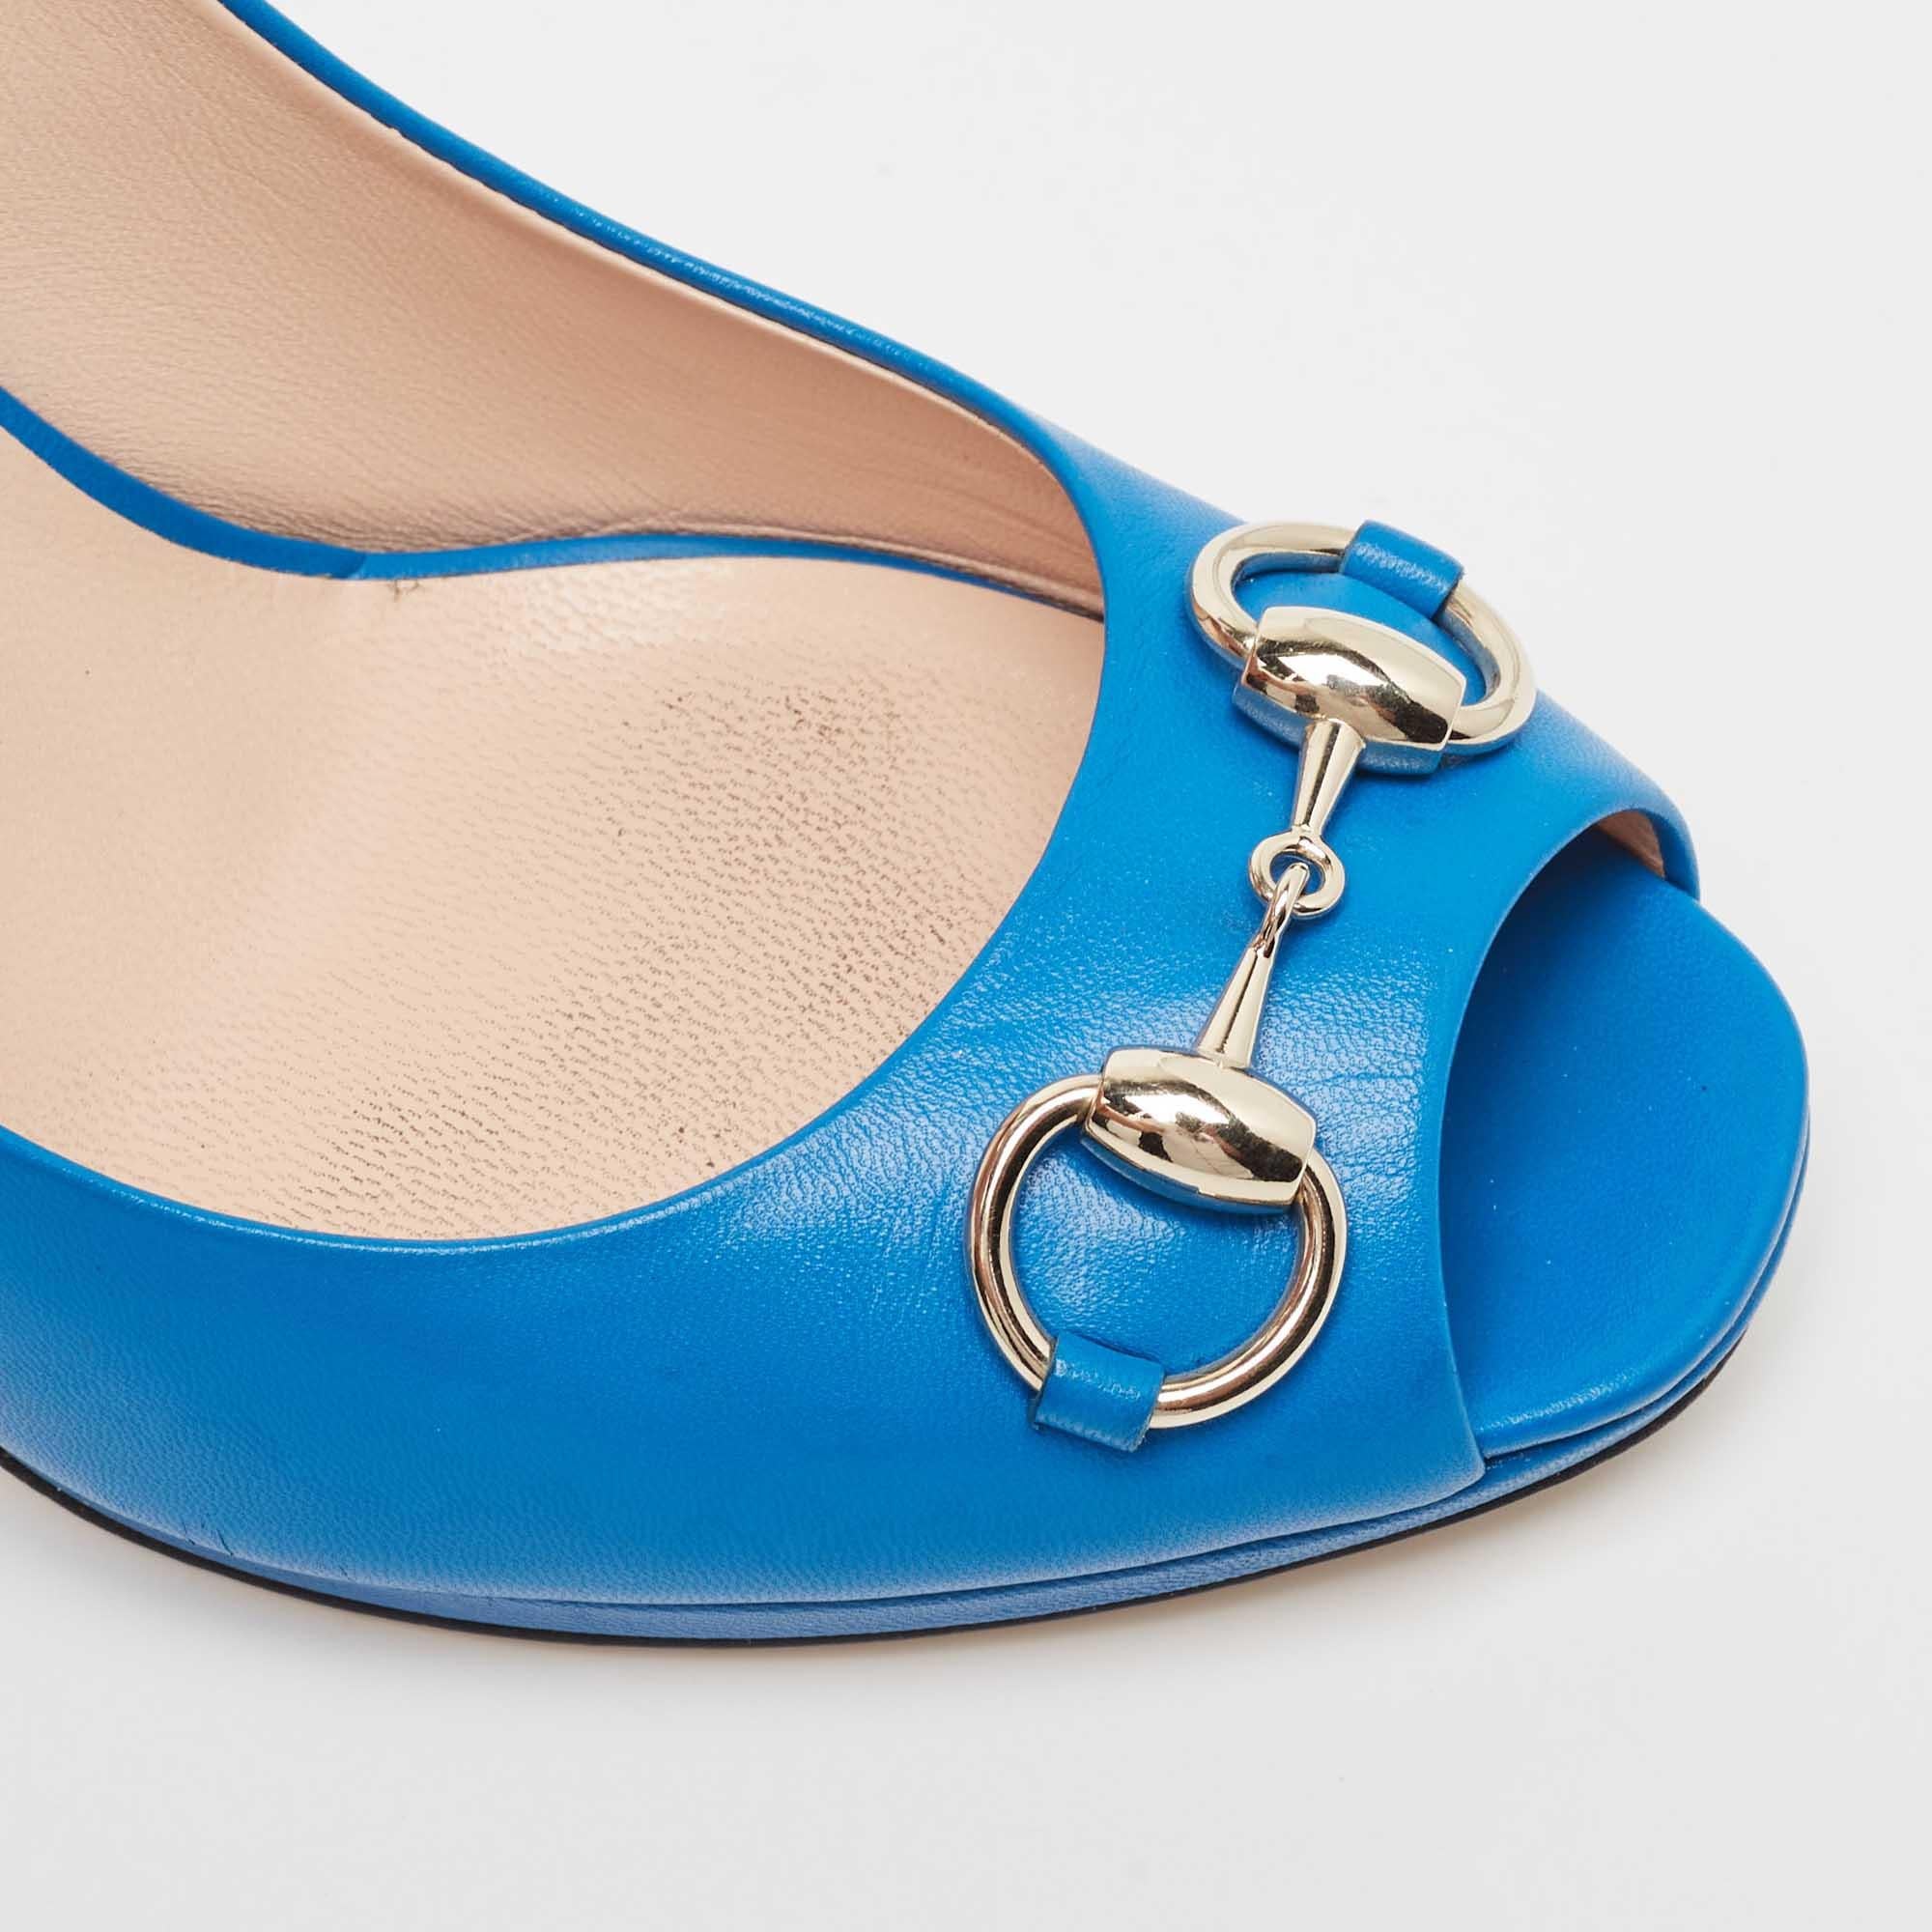 Gucci Blue Leather New Hollywood Platform Pumps Size 38.5 For Sale 2